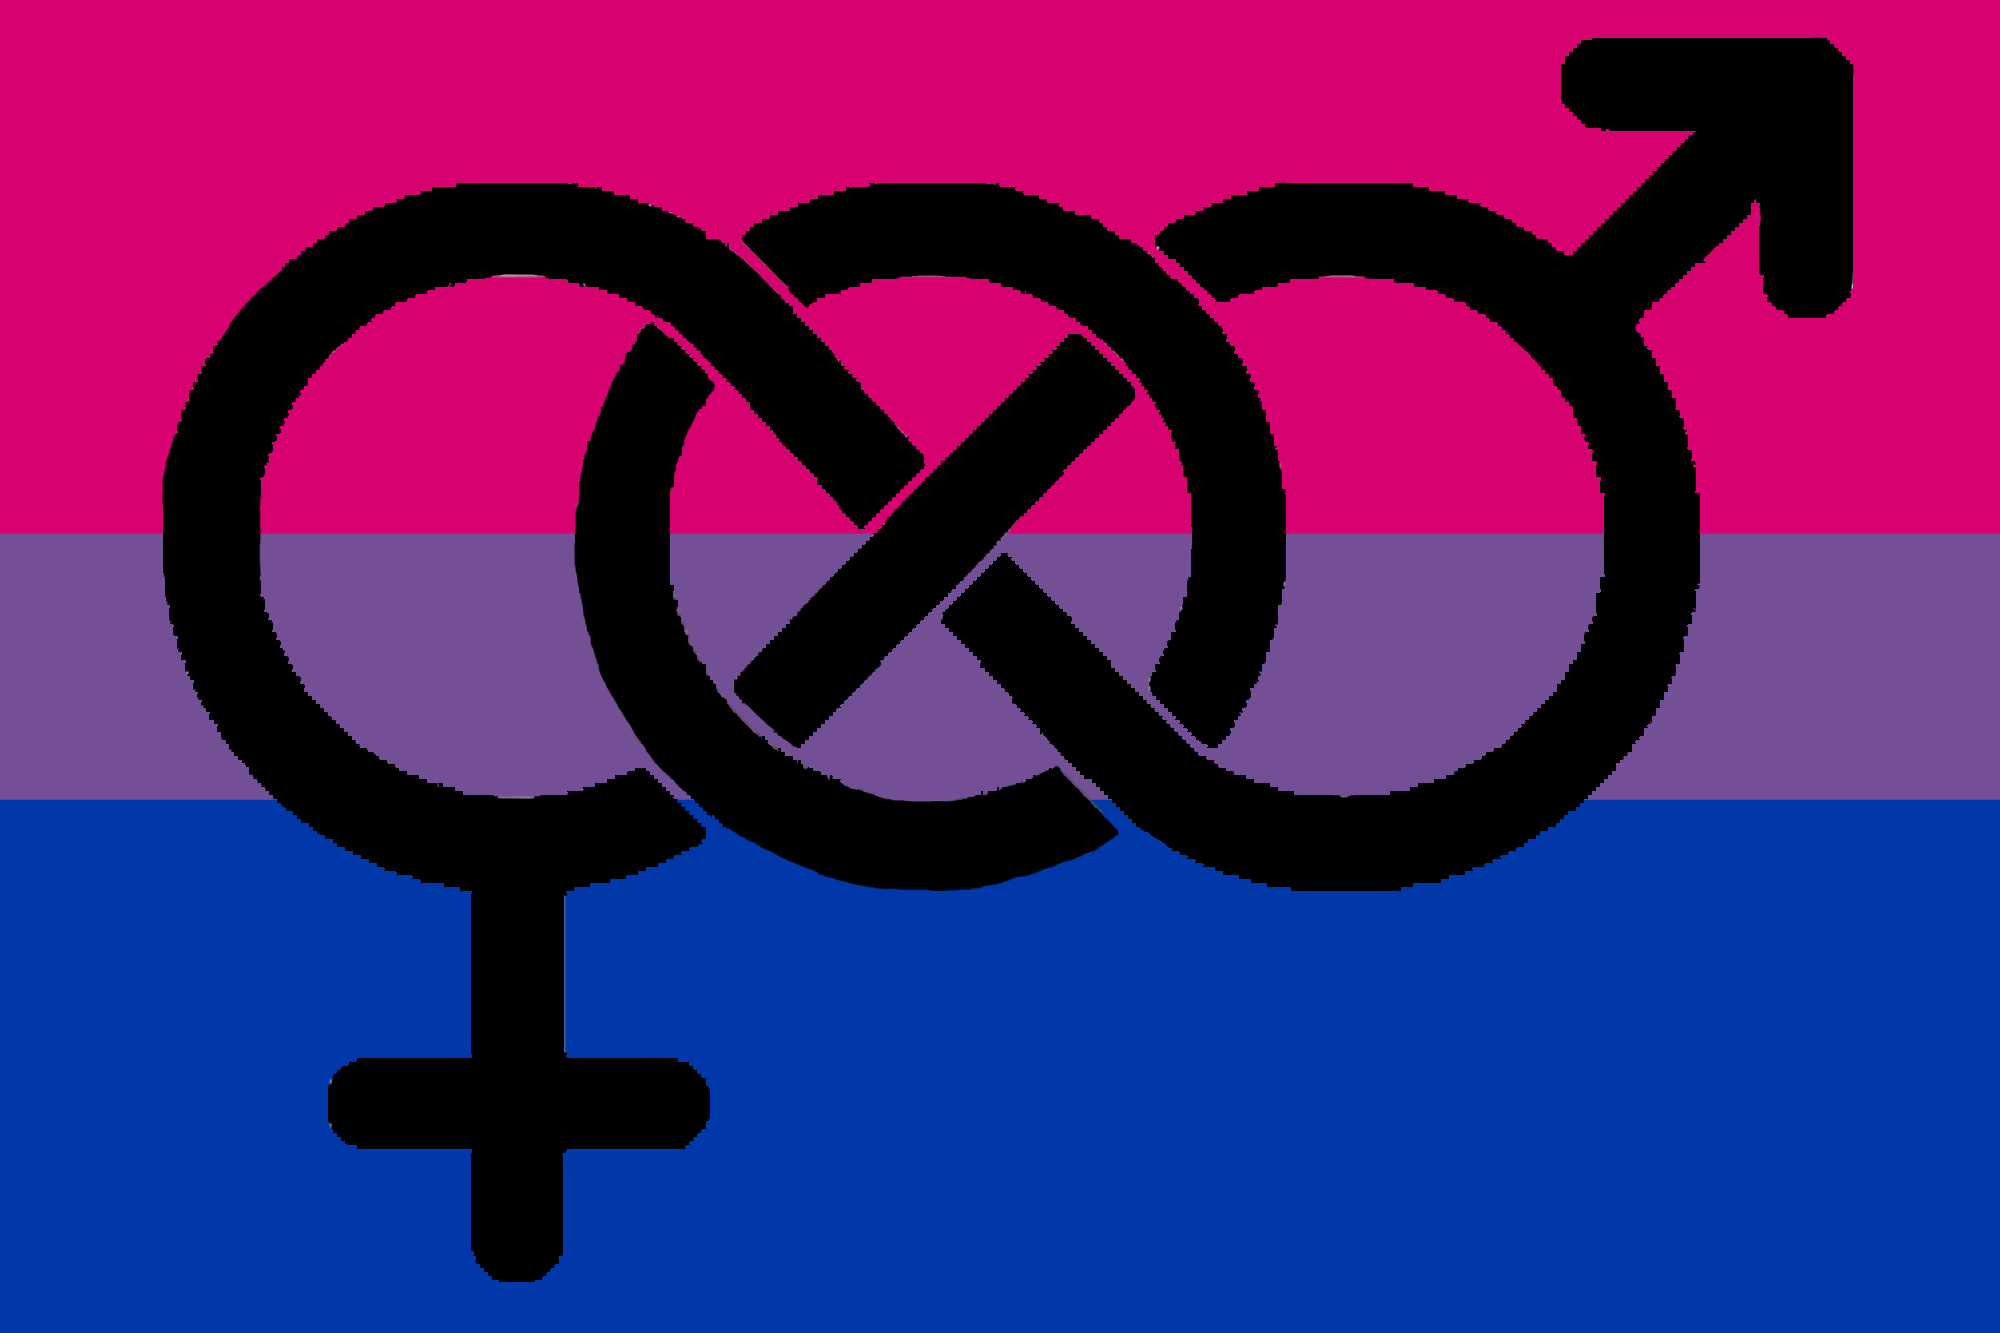 Bisexual And Proud